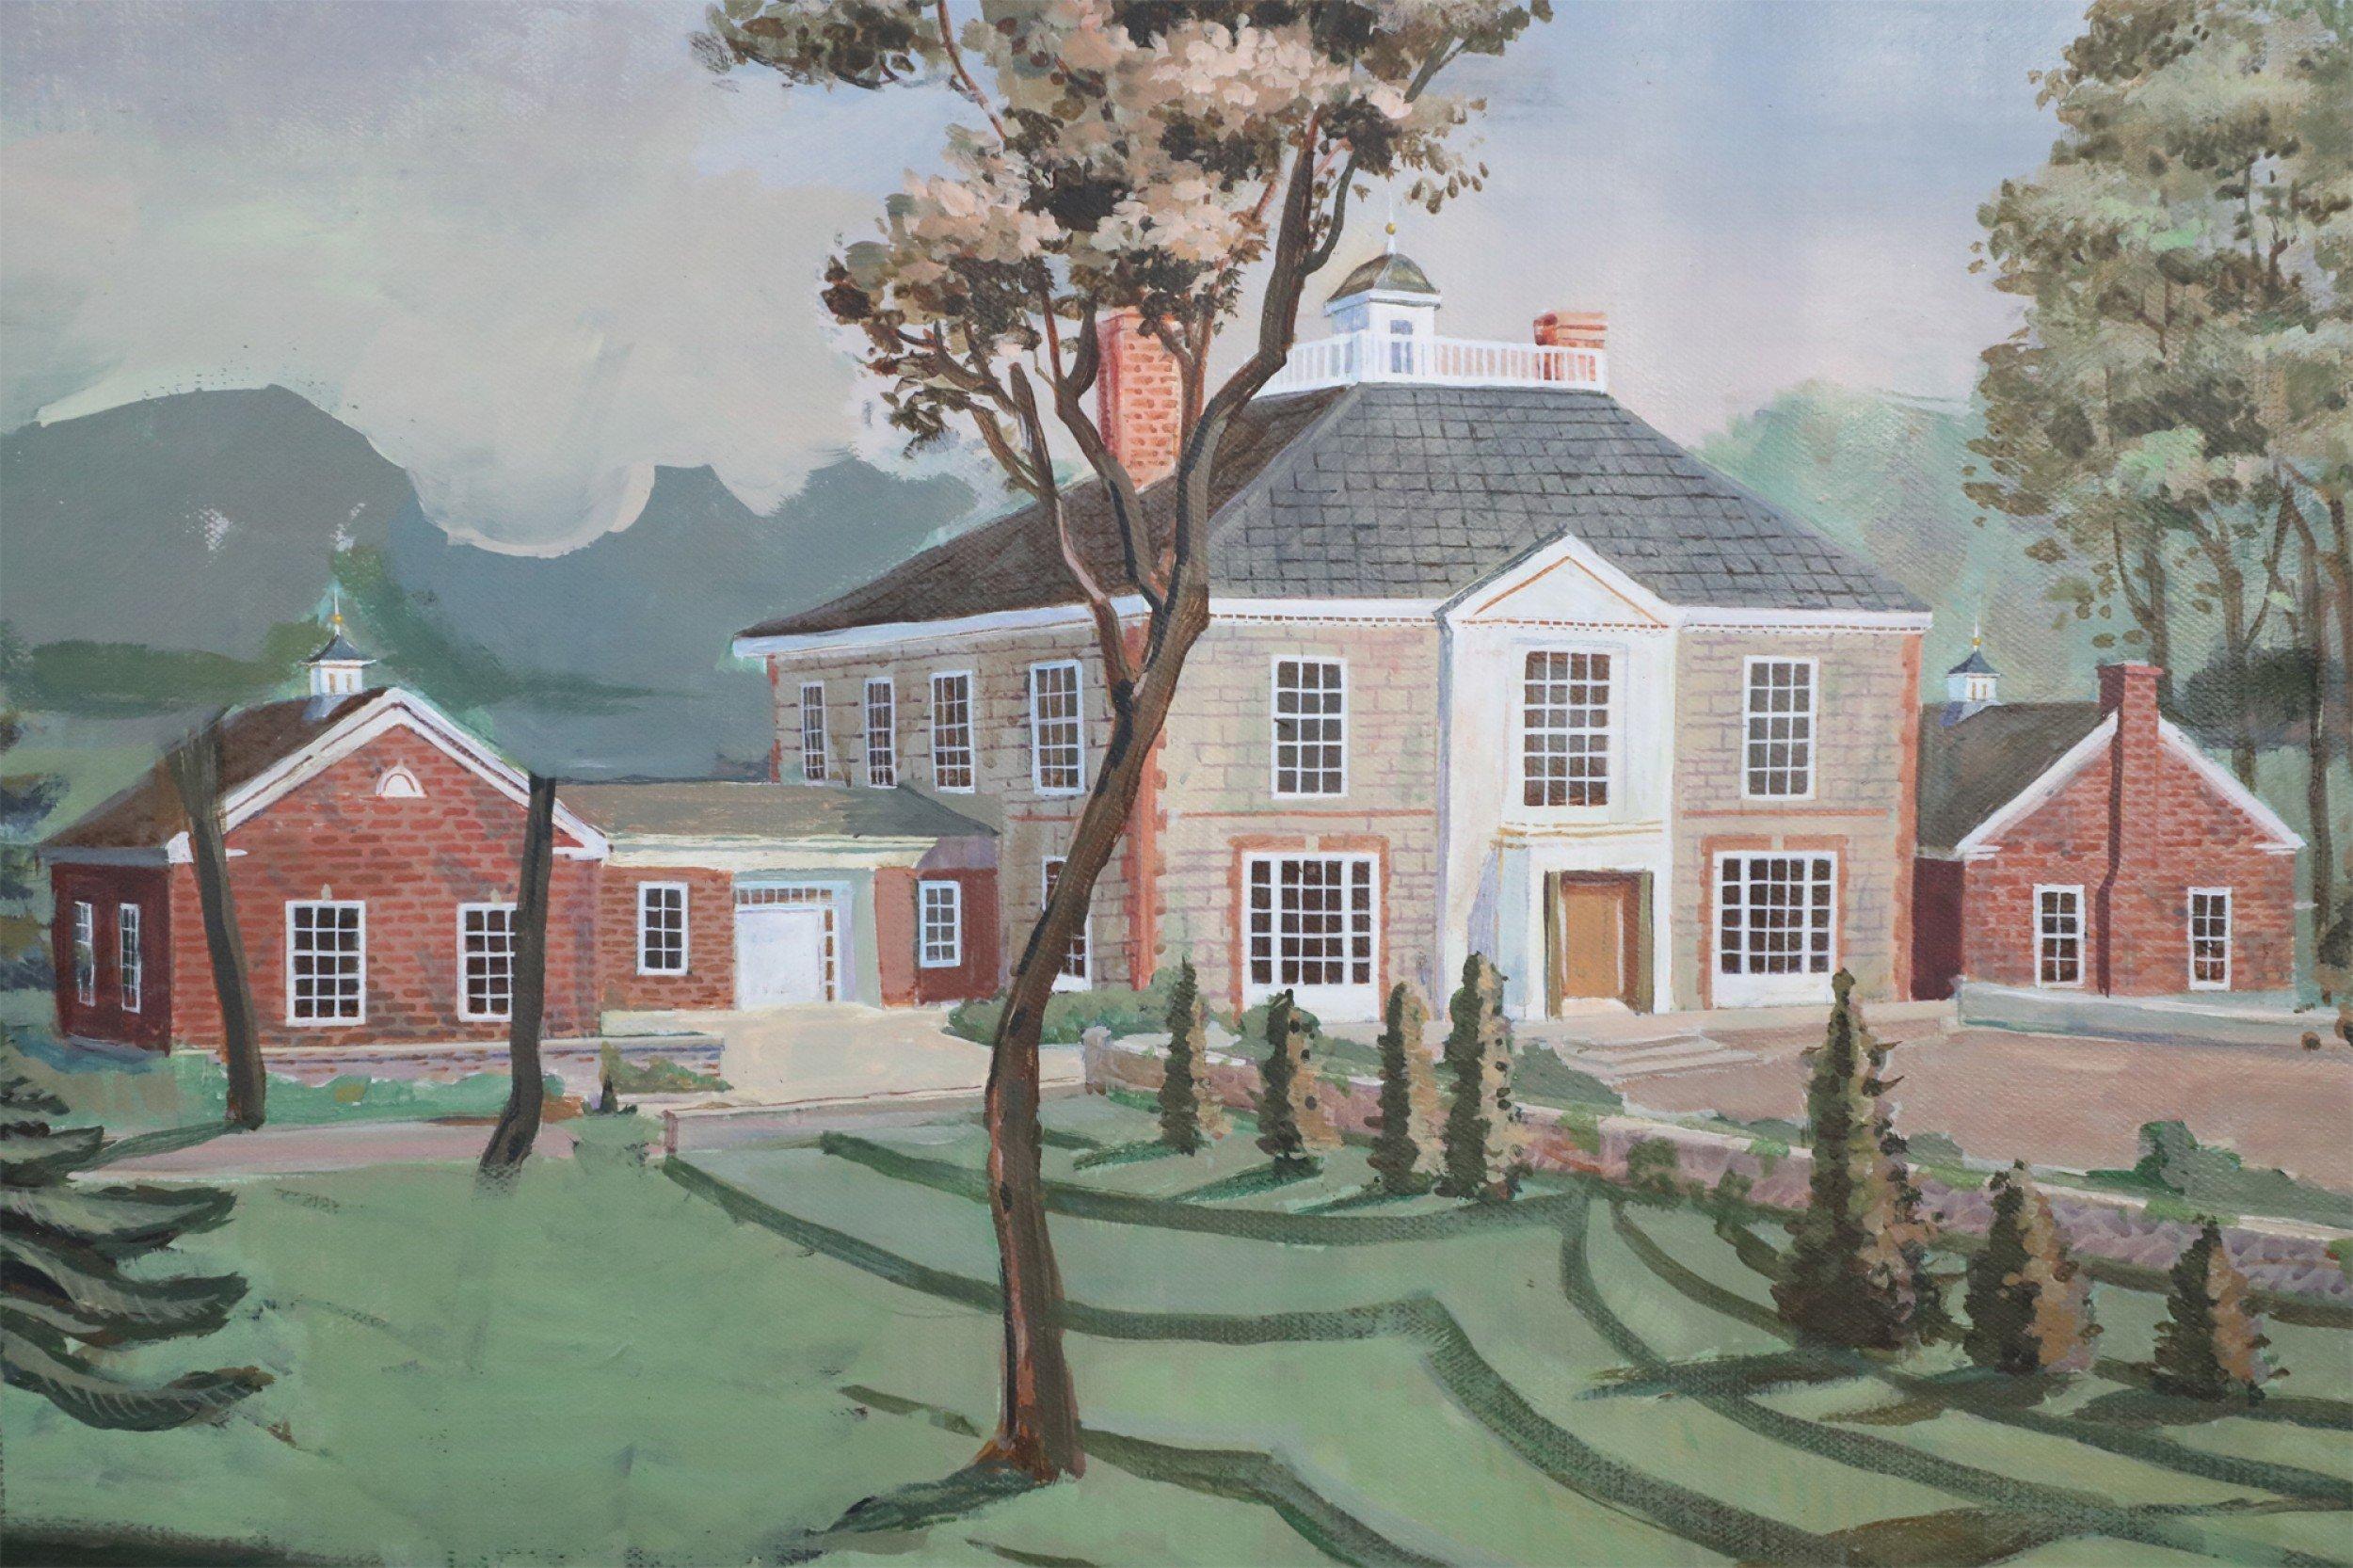 American Framed Panoramic Landscape and Manor House Painting For Sale